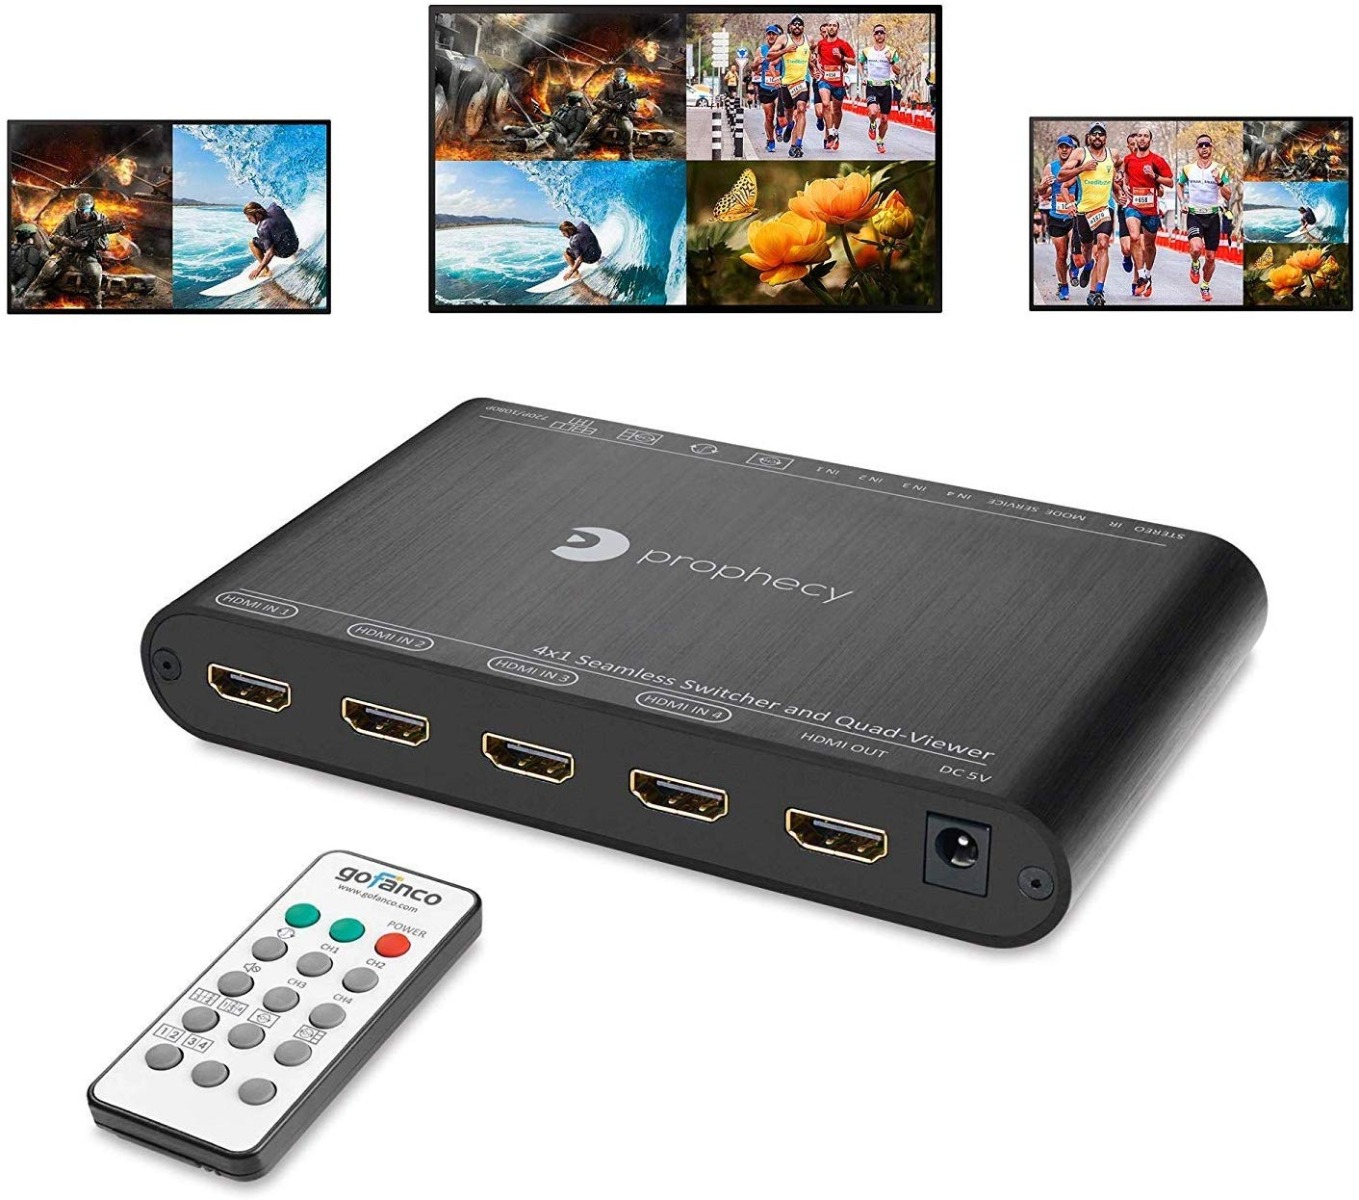 4x1 HDMI Quad-Viewer and Seamless Switcher (PRO-QuadView)